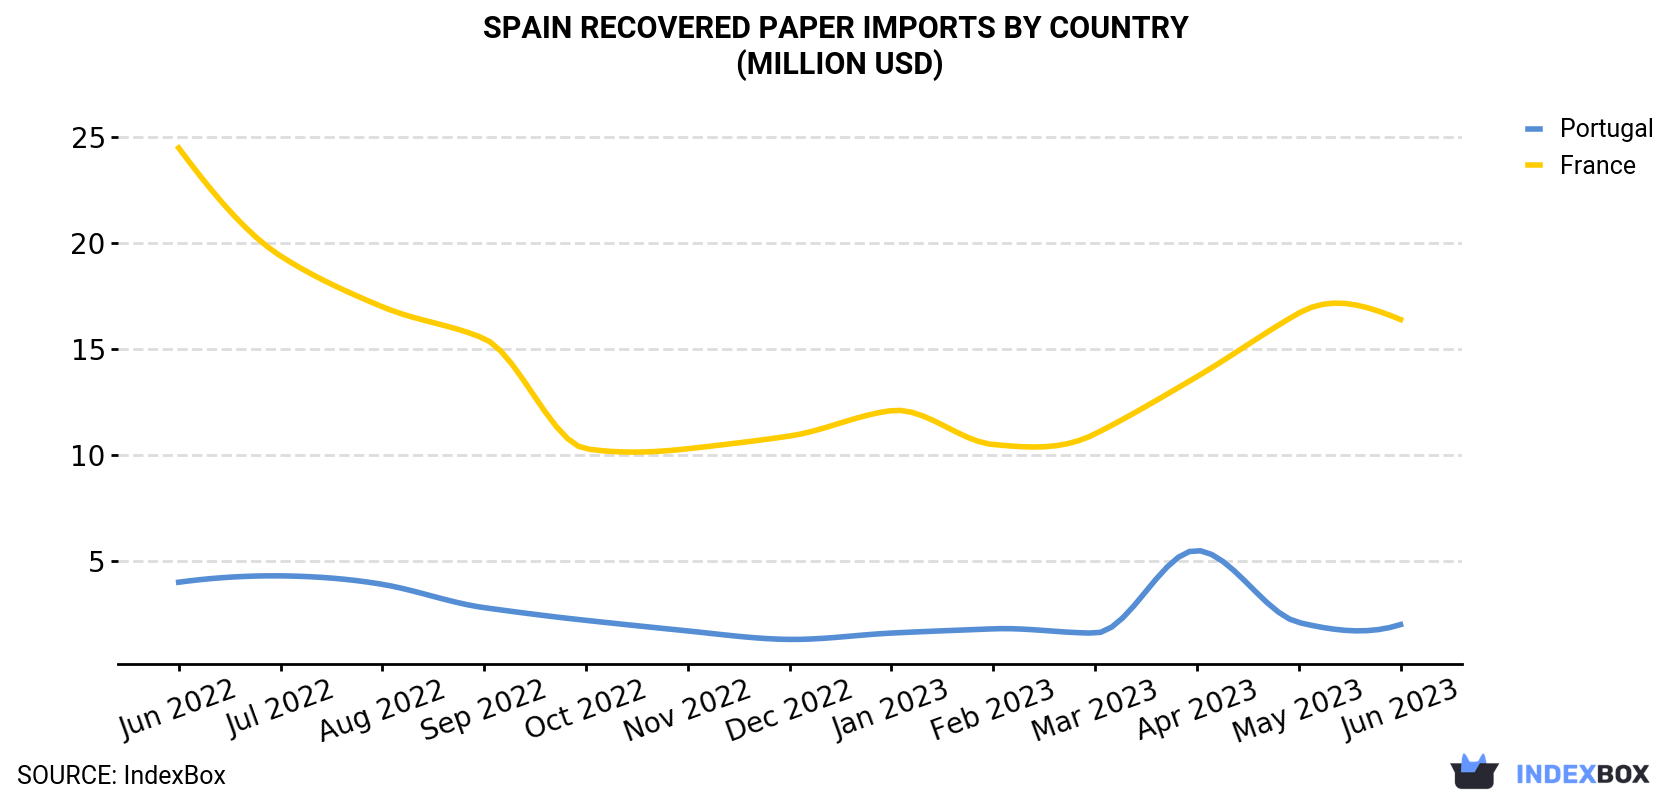 Spain Recovered Paper Imports By Country (Million USD)